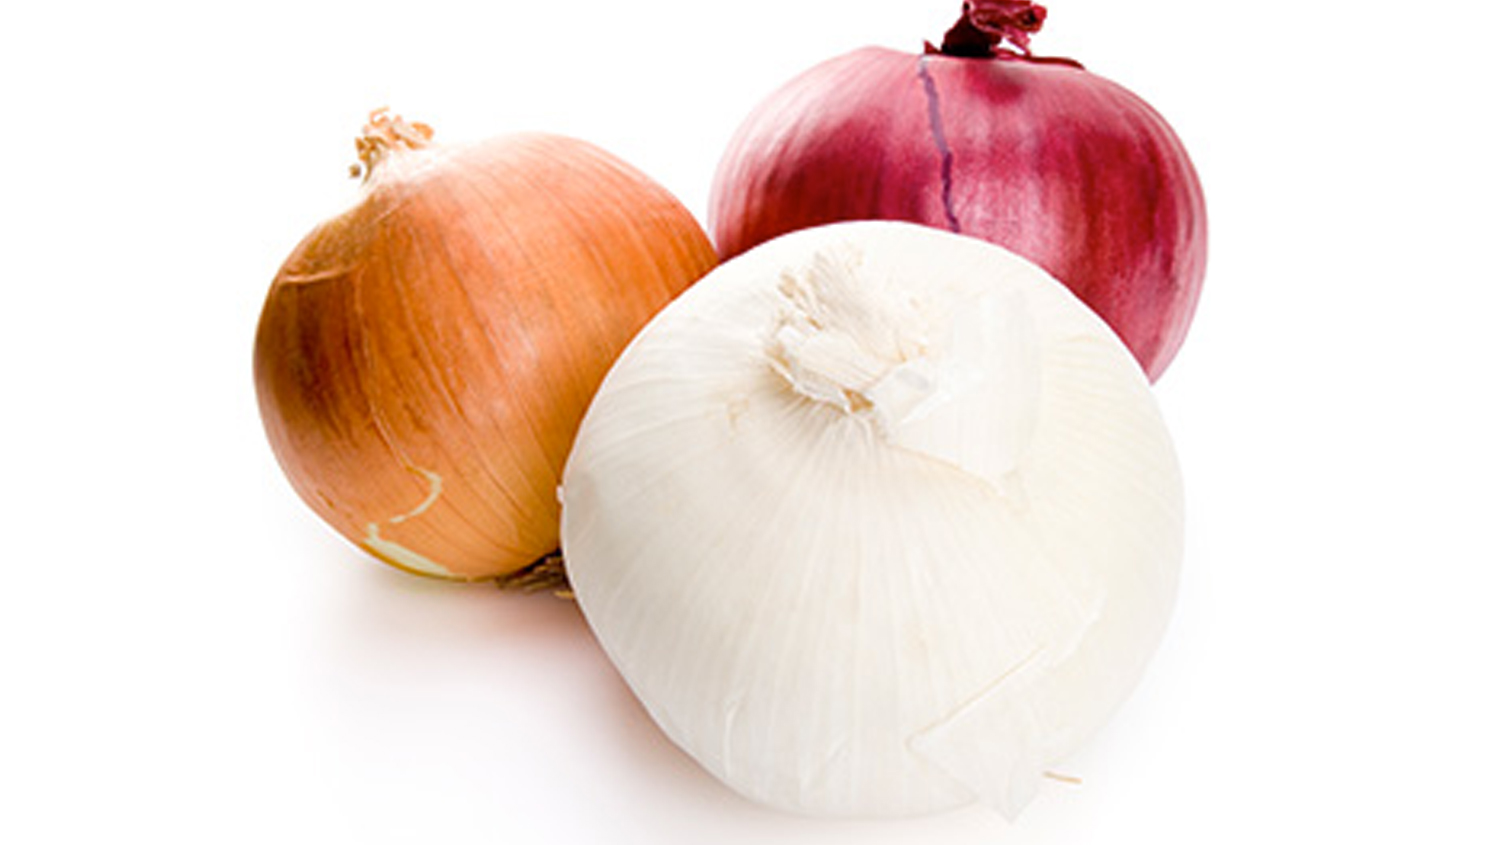 Dozens in Illinois Sickened by Salmonella Outbreak Linked to Onions